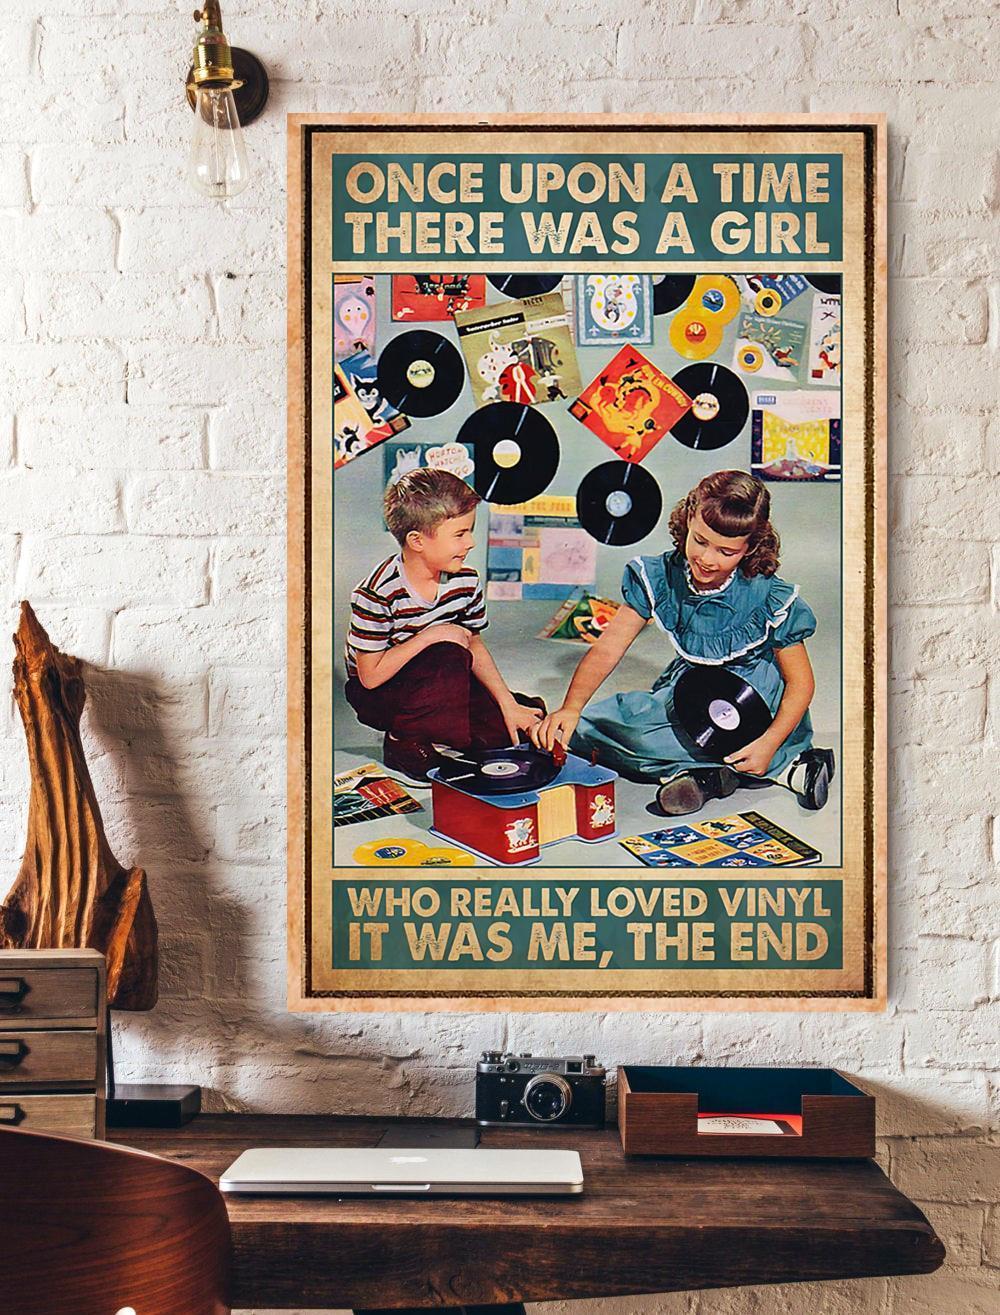 Once Upon A Time A Girl Who Loved Vinyl Canvas And Poster, Wall Decor Visual Art